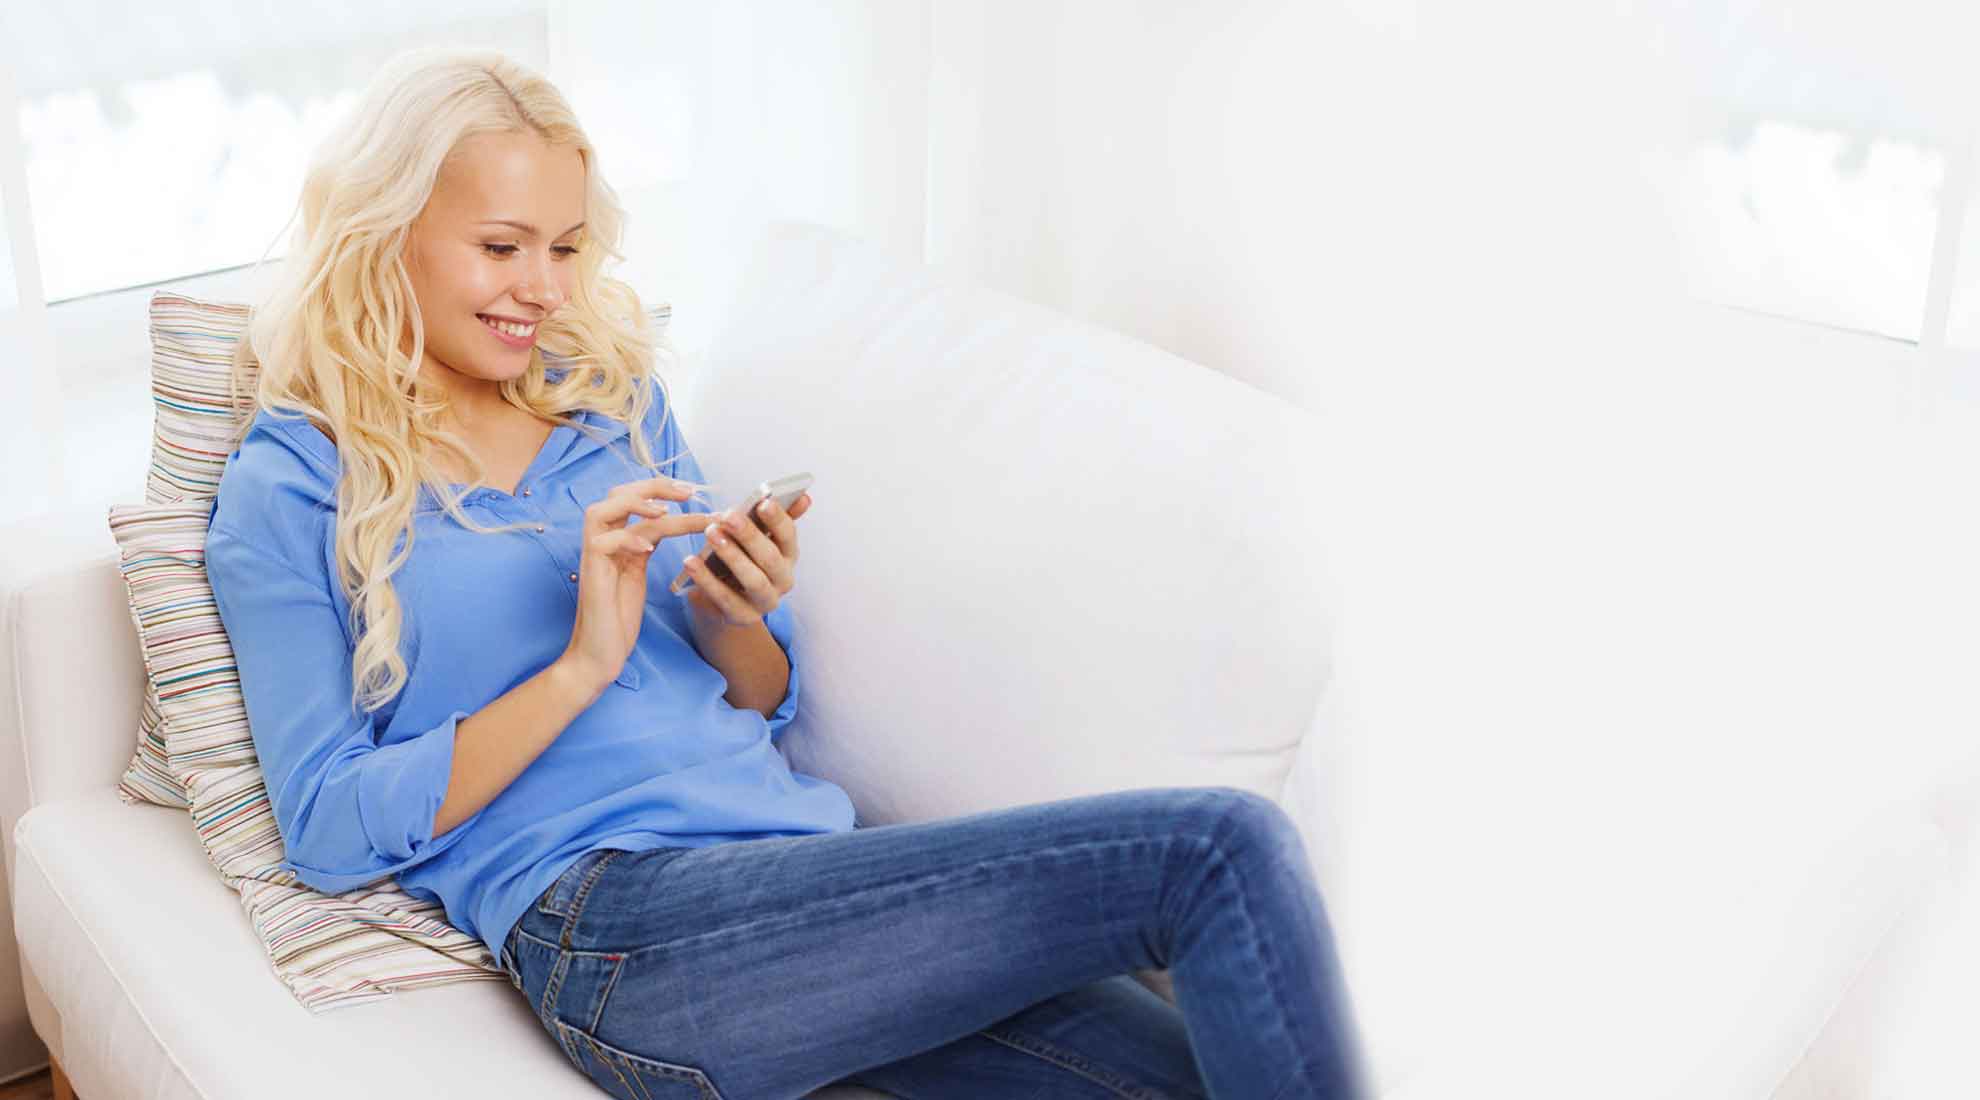 image of lady using a mobile website on a cell phone